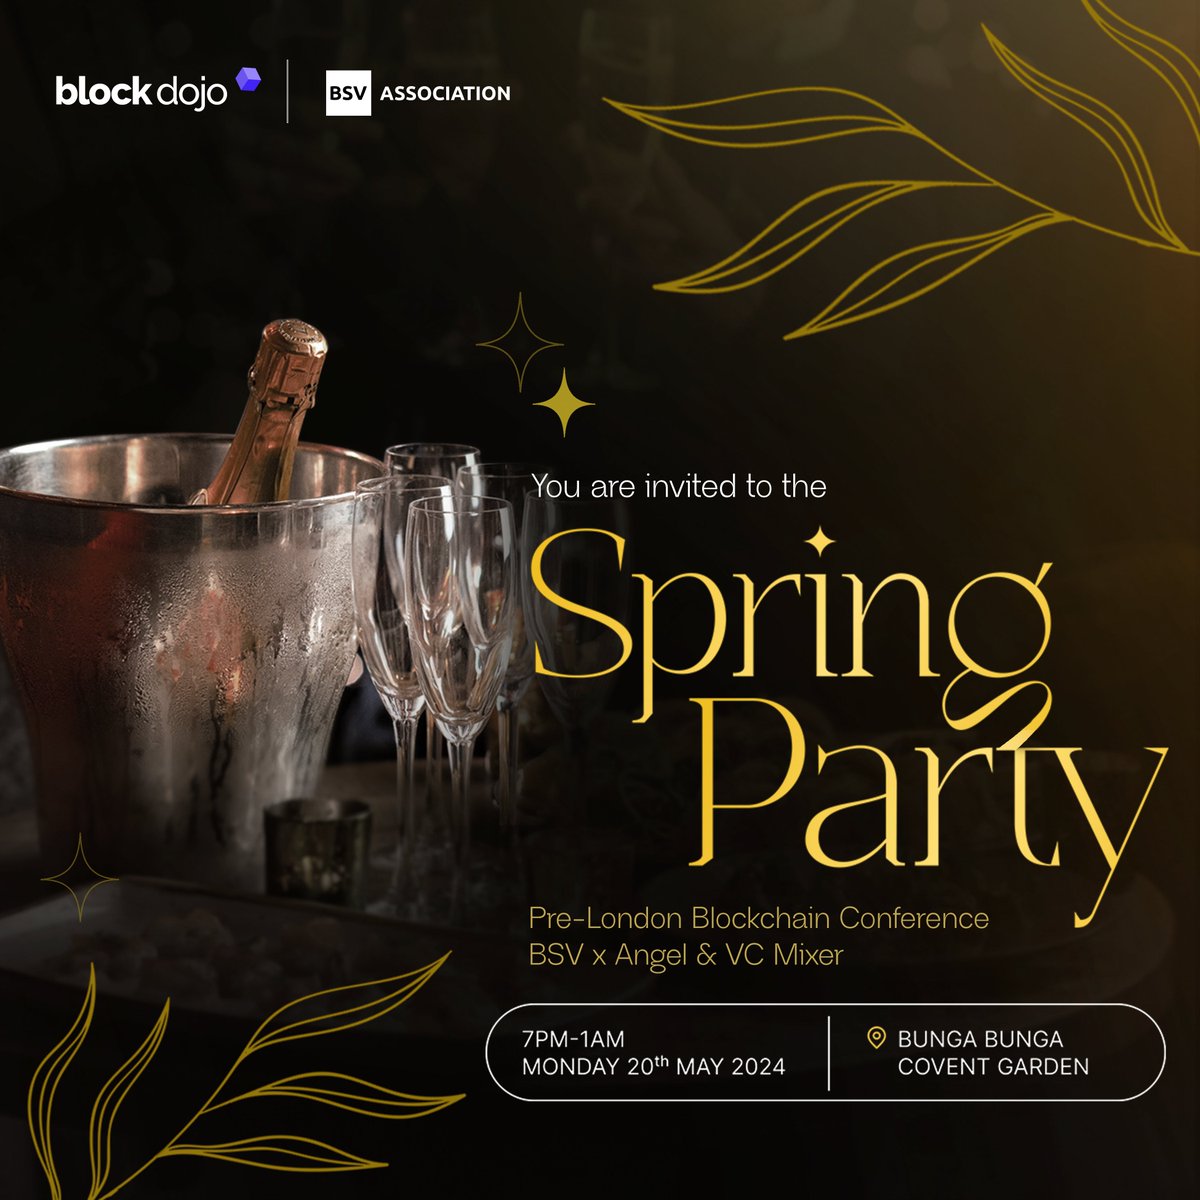 Join us for the London Blockchain Conference kickoff! Network with industry leaders at the Pre-LBC Block Dojo X Bitcoin Association Spring Party and enjoy complimentary food/drinks. Don't miss out on shaping tech's future. Register now! 👉🏾lu.ma/DojoSpringParty